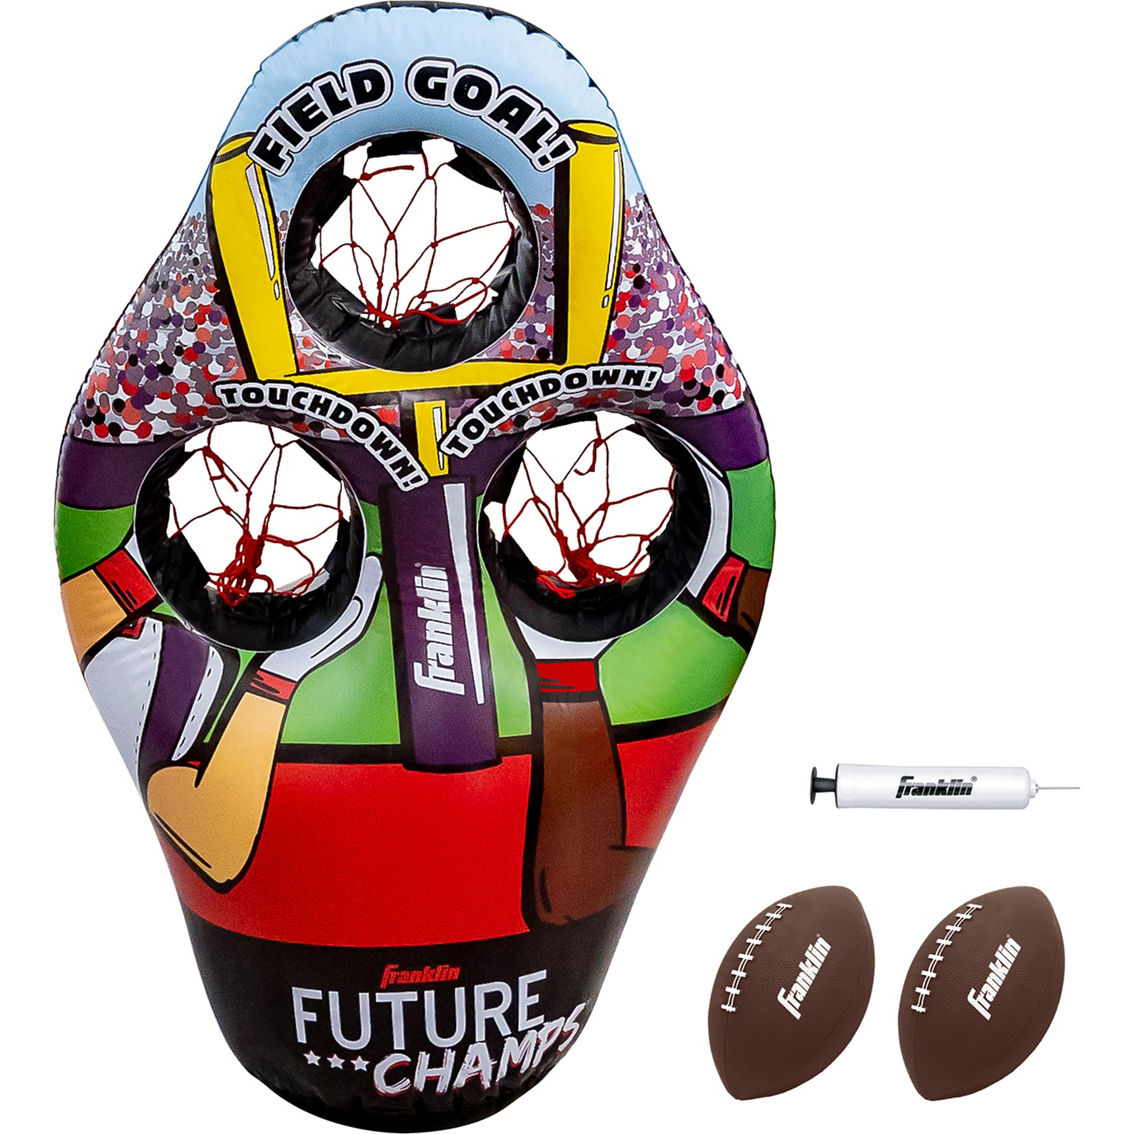 Franklin Kids Inflatable 3-Hole Football Target - Image 2 of 9